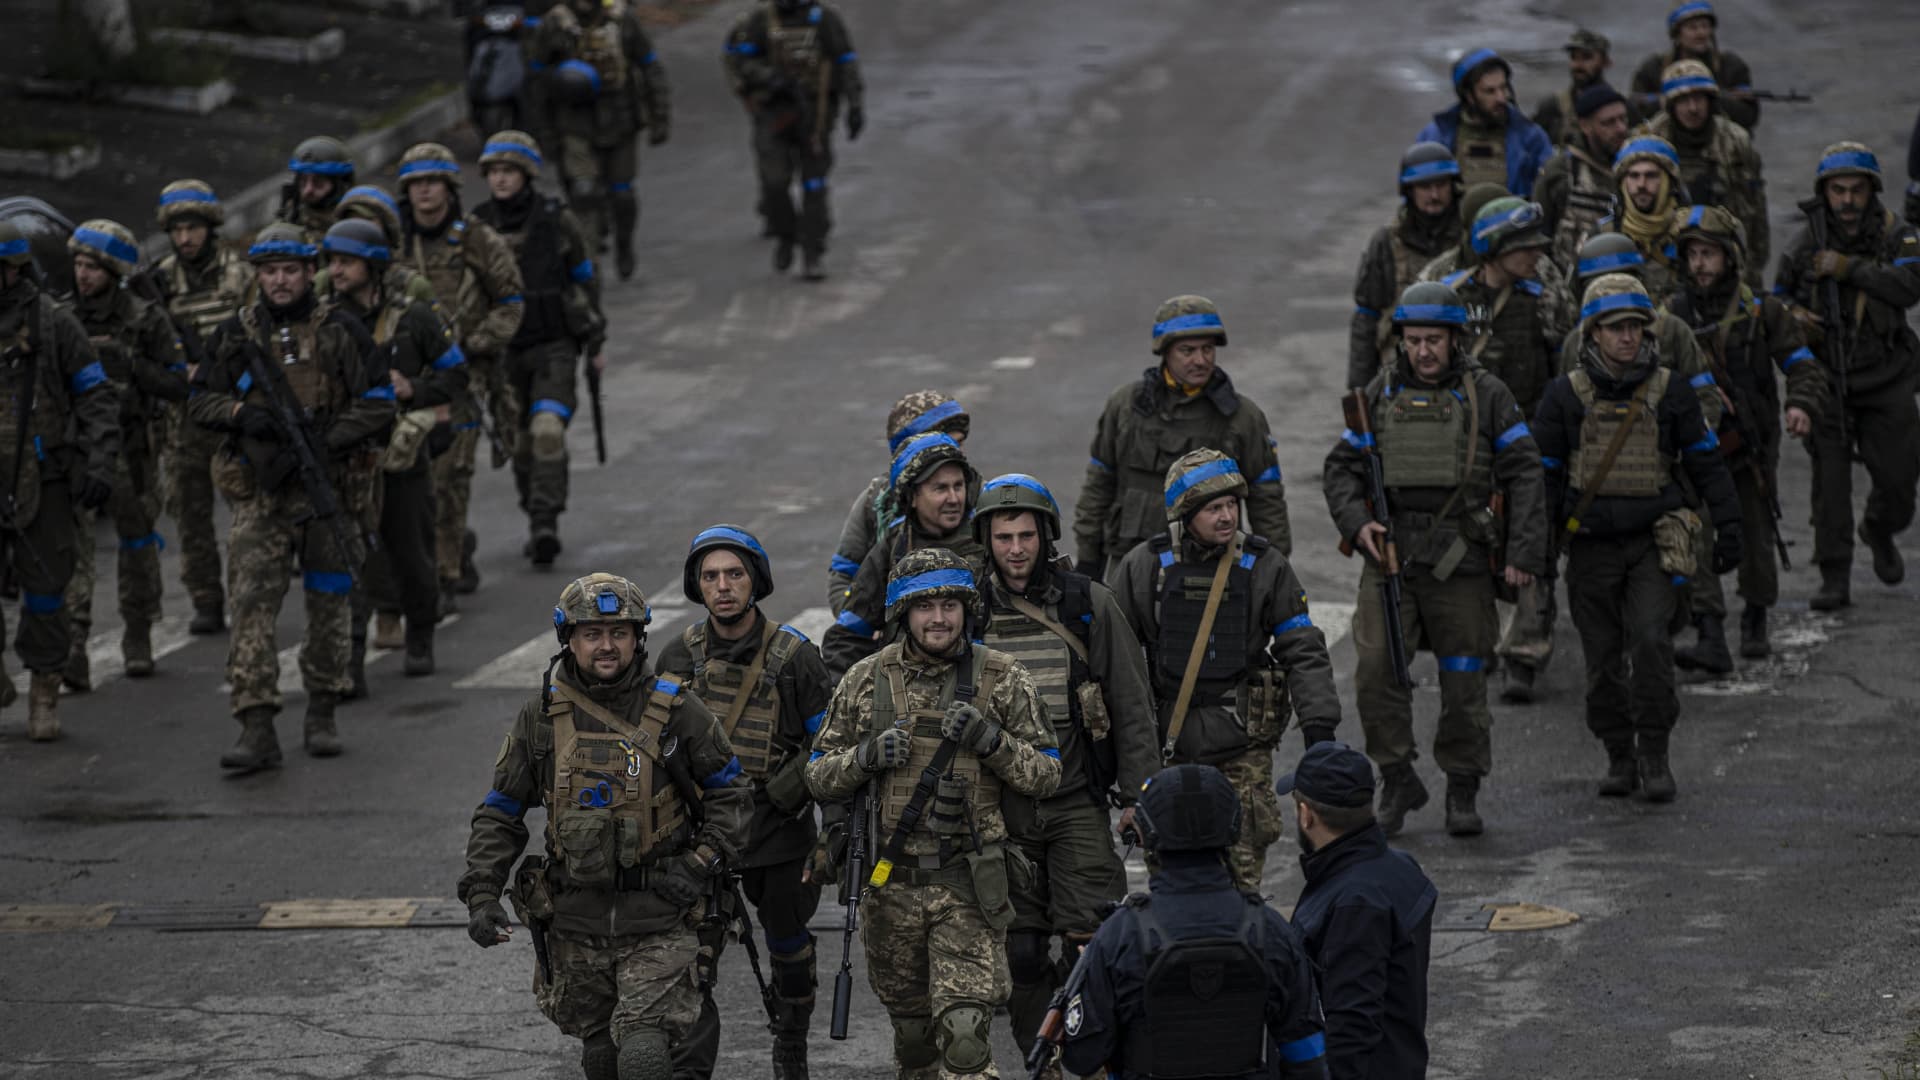 Ukrainian soldiers patrol at the streets of Izium city after Russian Forces withdrawal as Russia-Ukraine war continues in, Kharkiv Oblast, Ukraine on September 14, 2022.